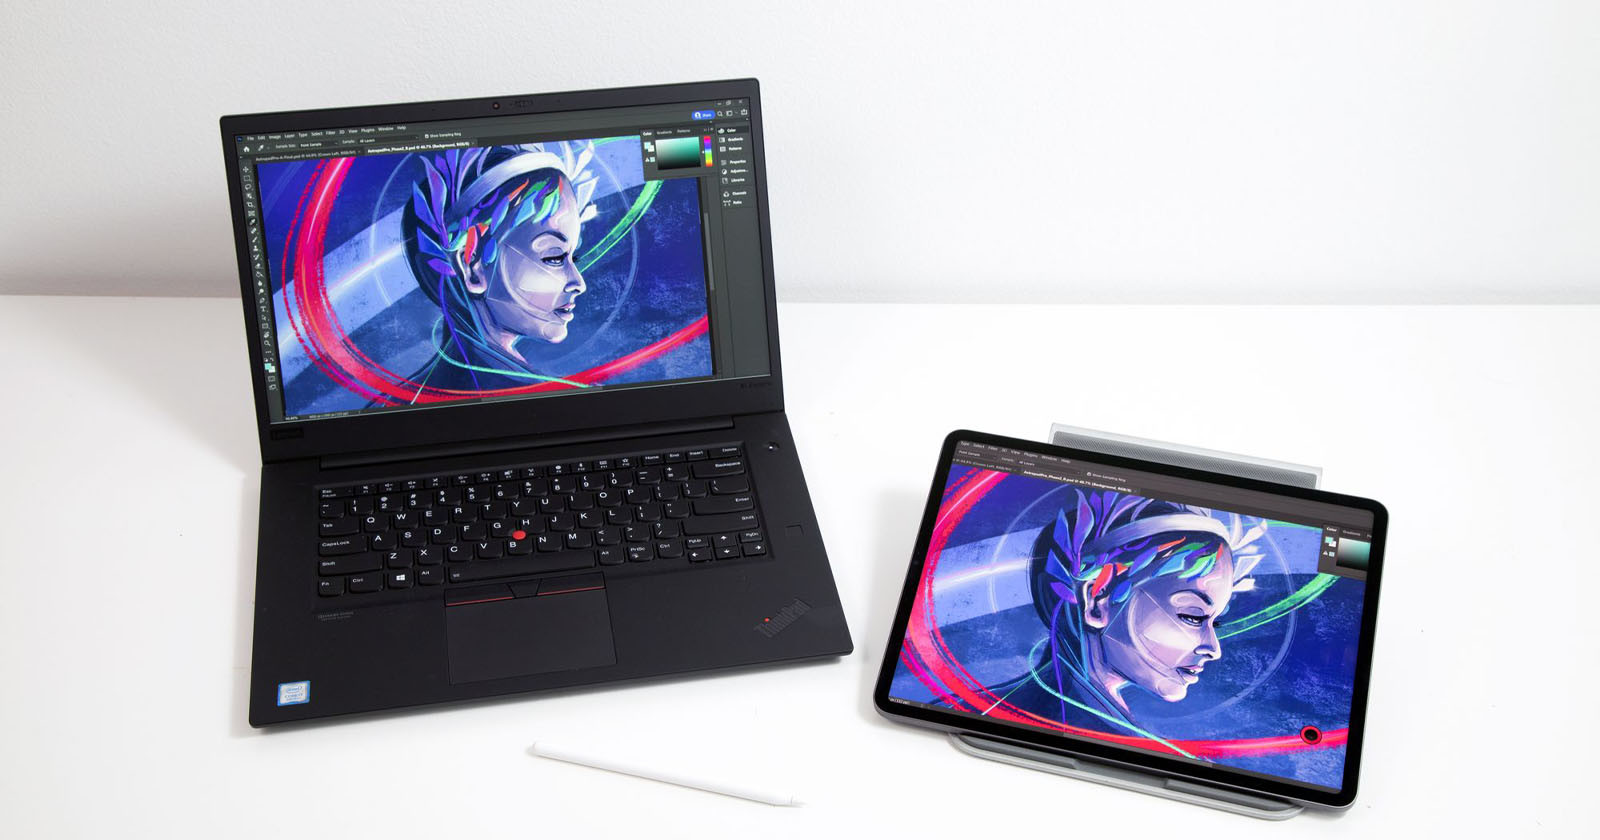  astropad studio ipad now fully compatible 